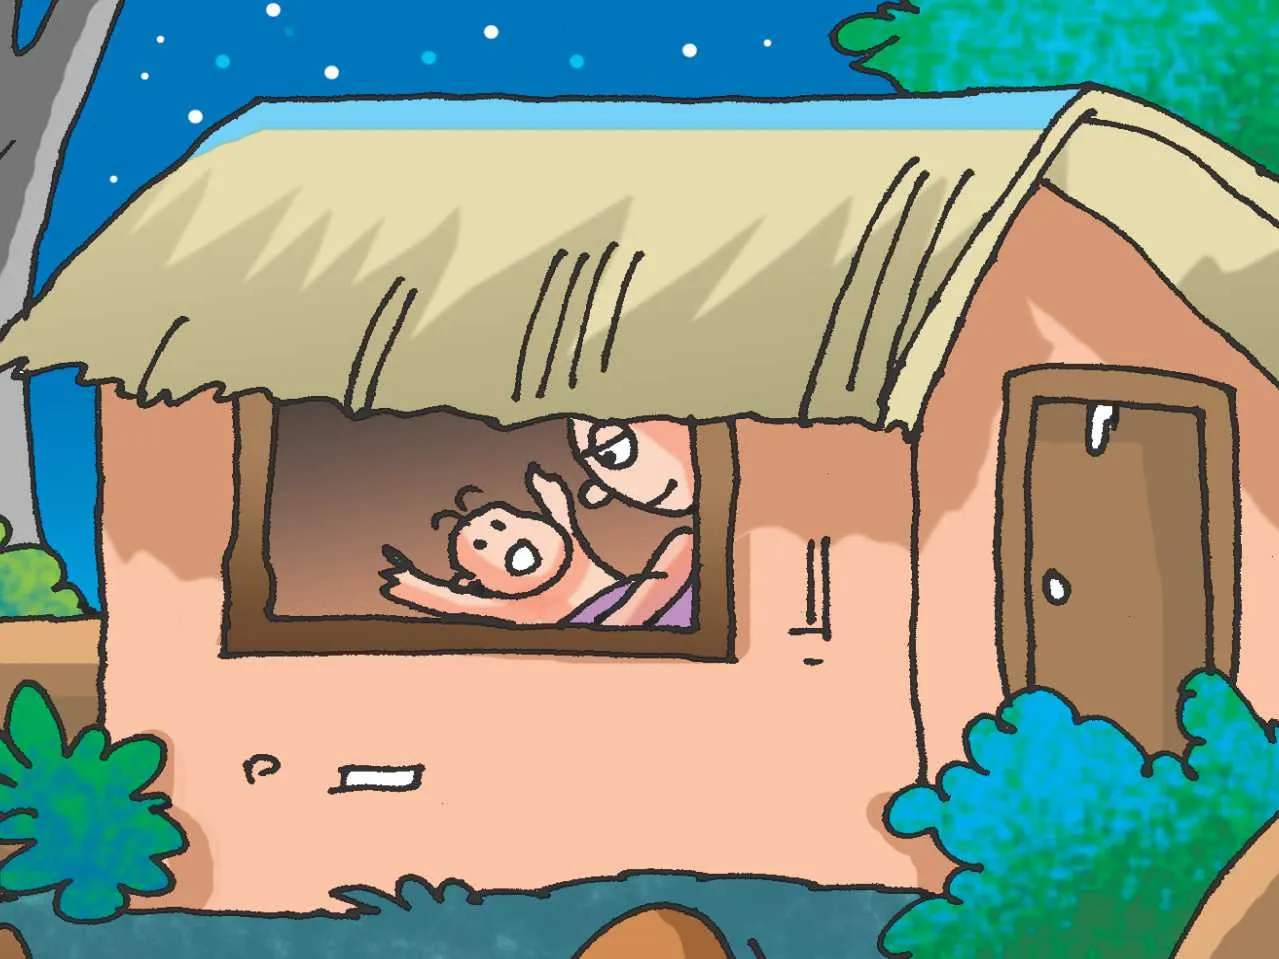 Kid and her mother in a hut cartoon image